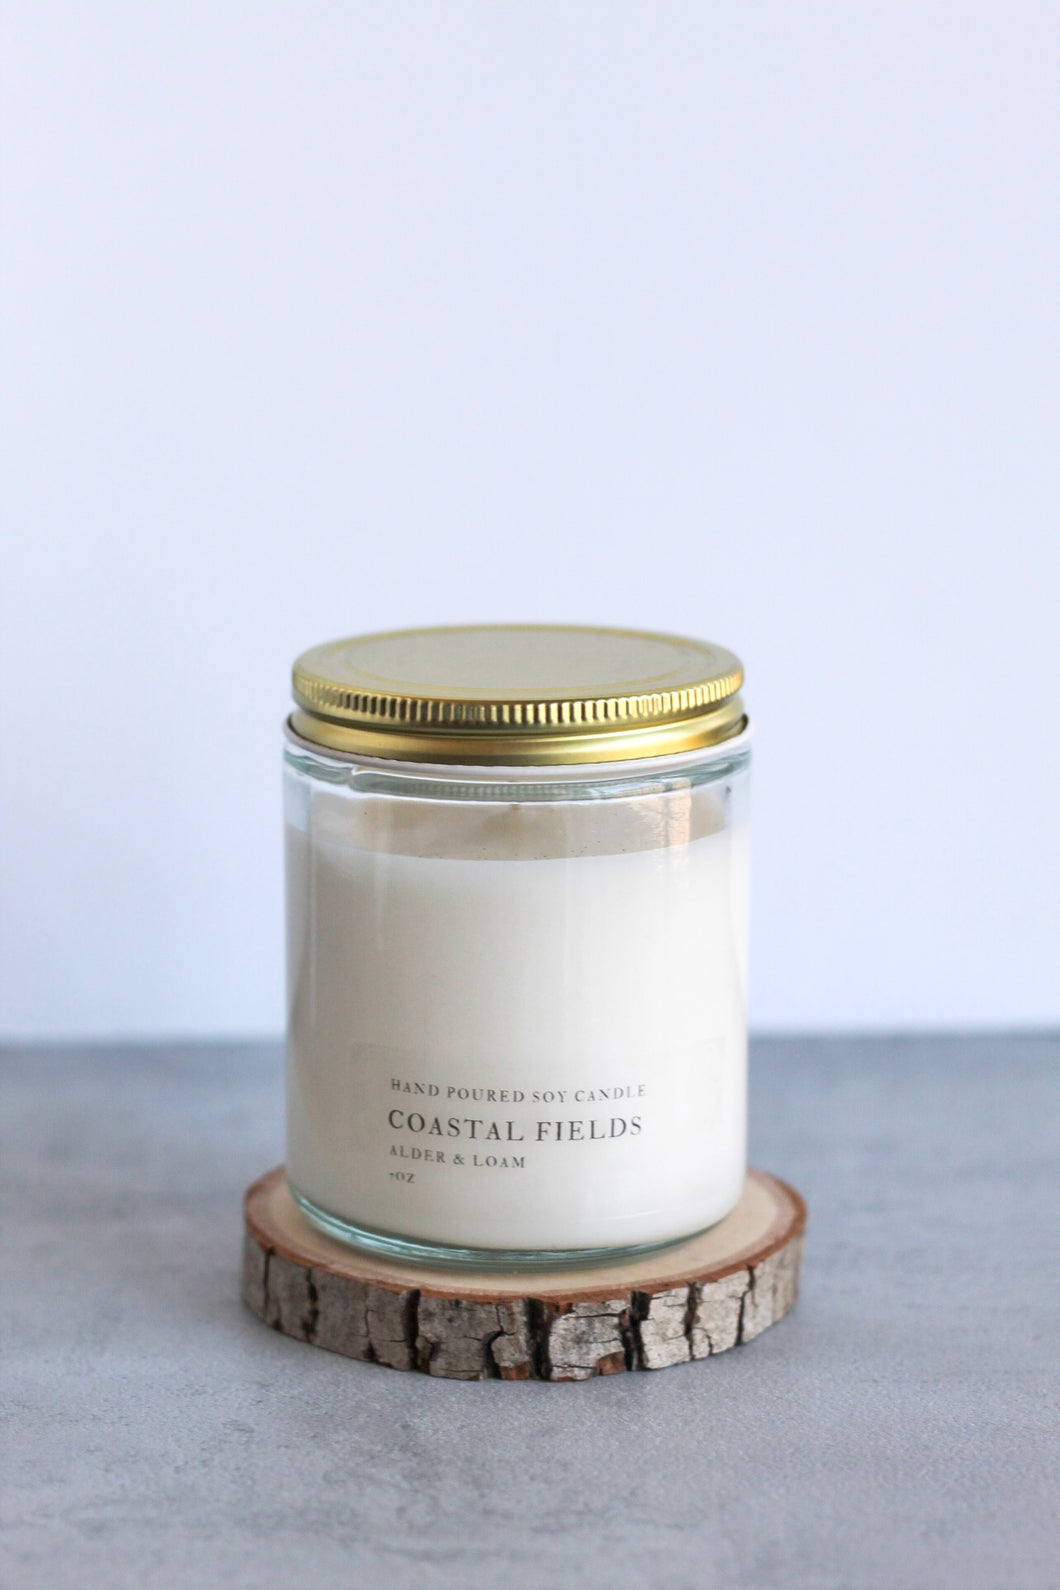 Coastal Fields Soy Candle, Hand Poured, Natural, Eco Friendly, Beachy Scent, 7 oz Jar